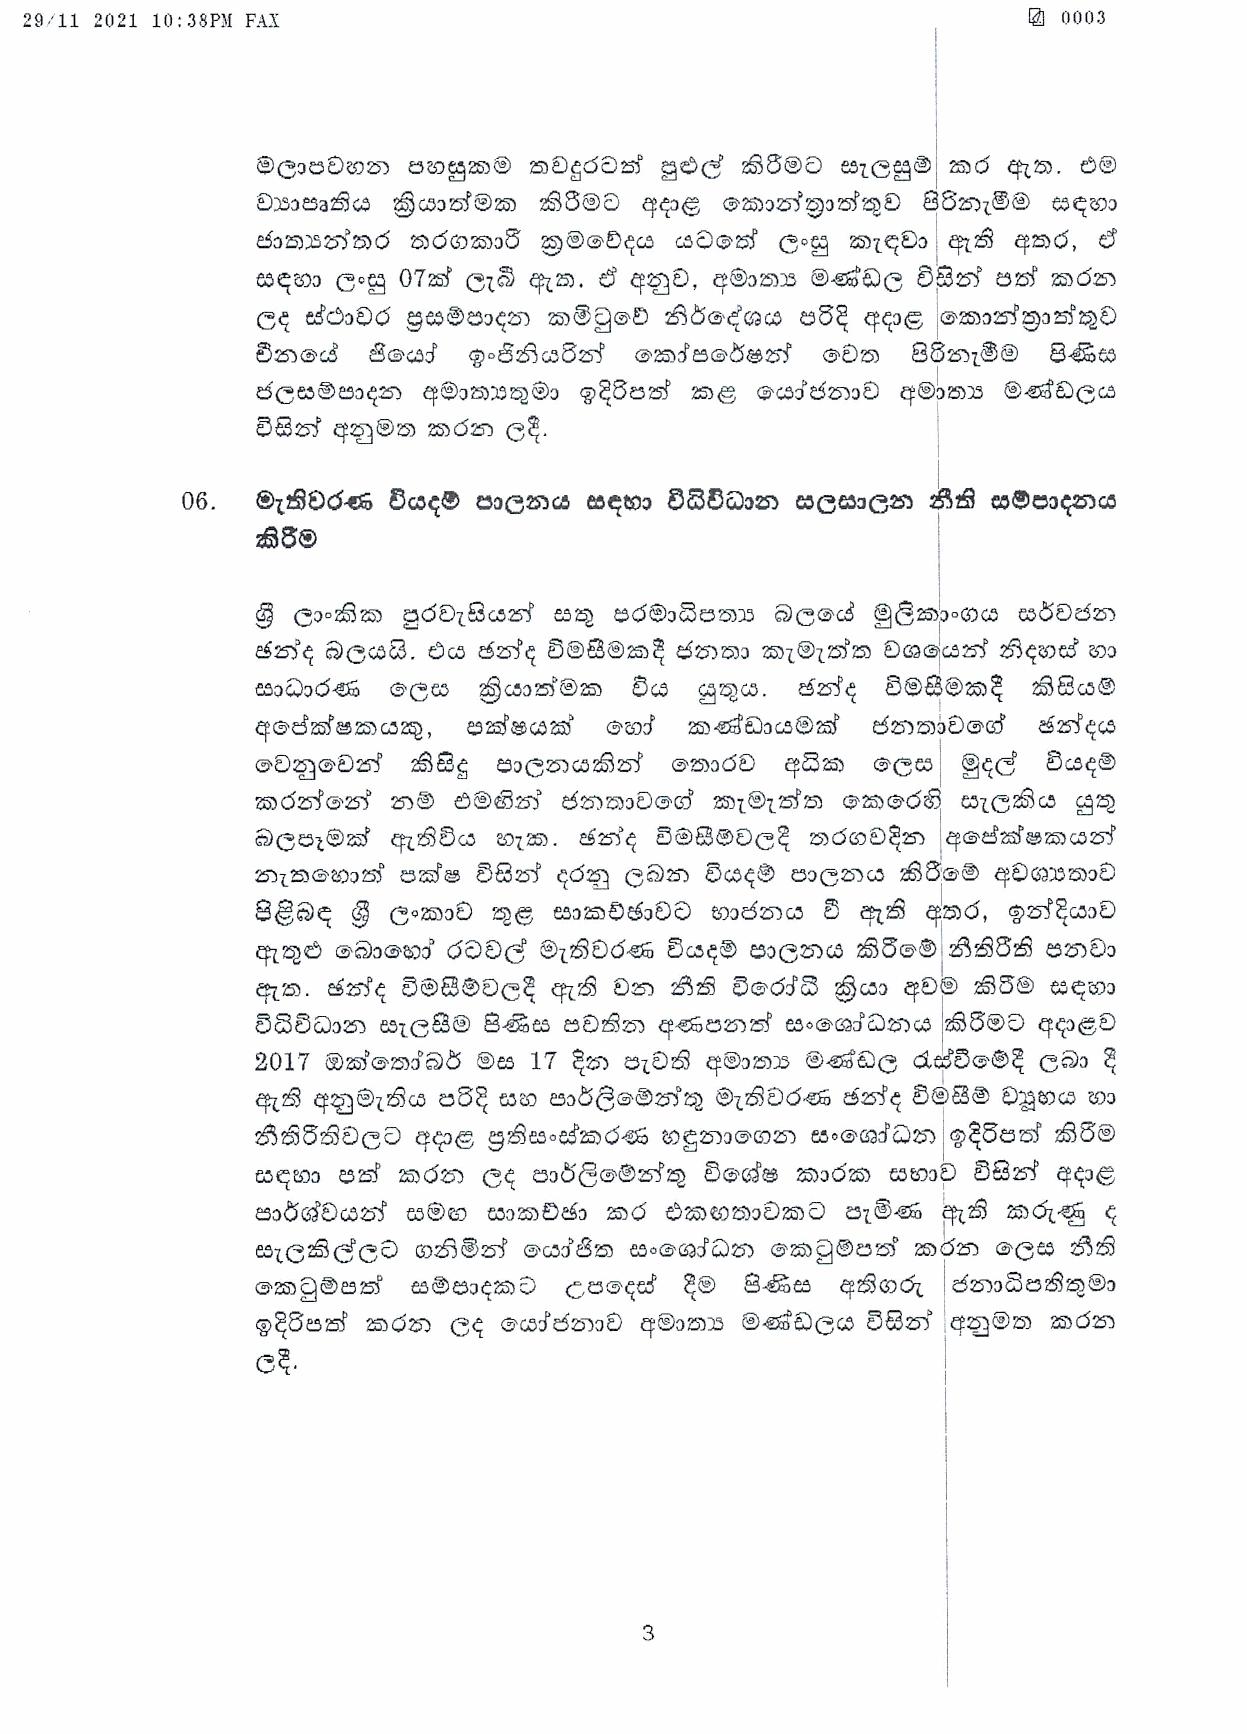 Cabinet Decisions on 29.11.2021 page 003